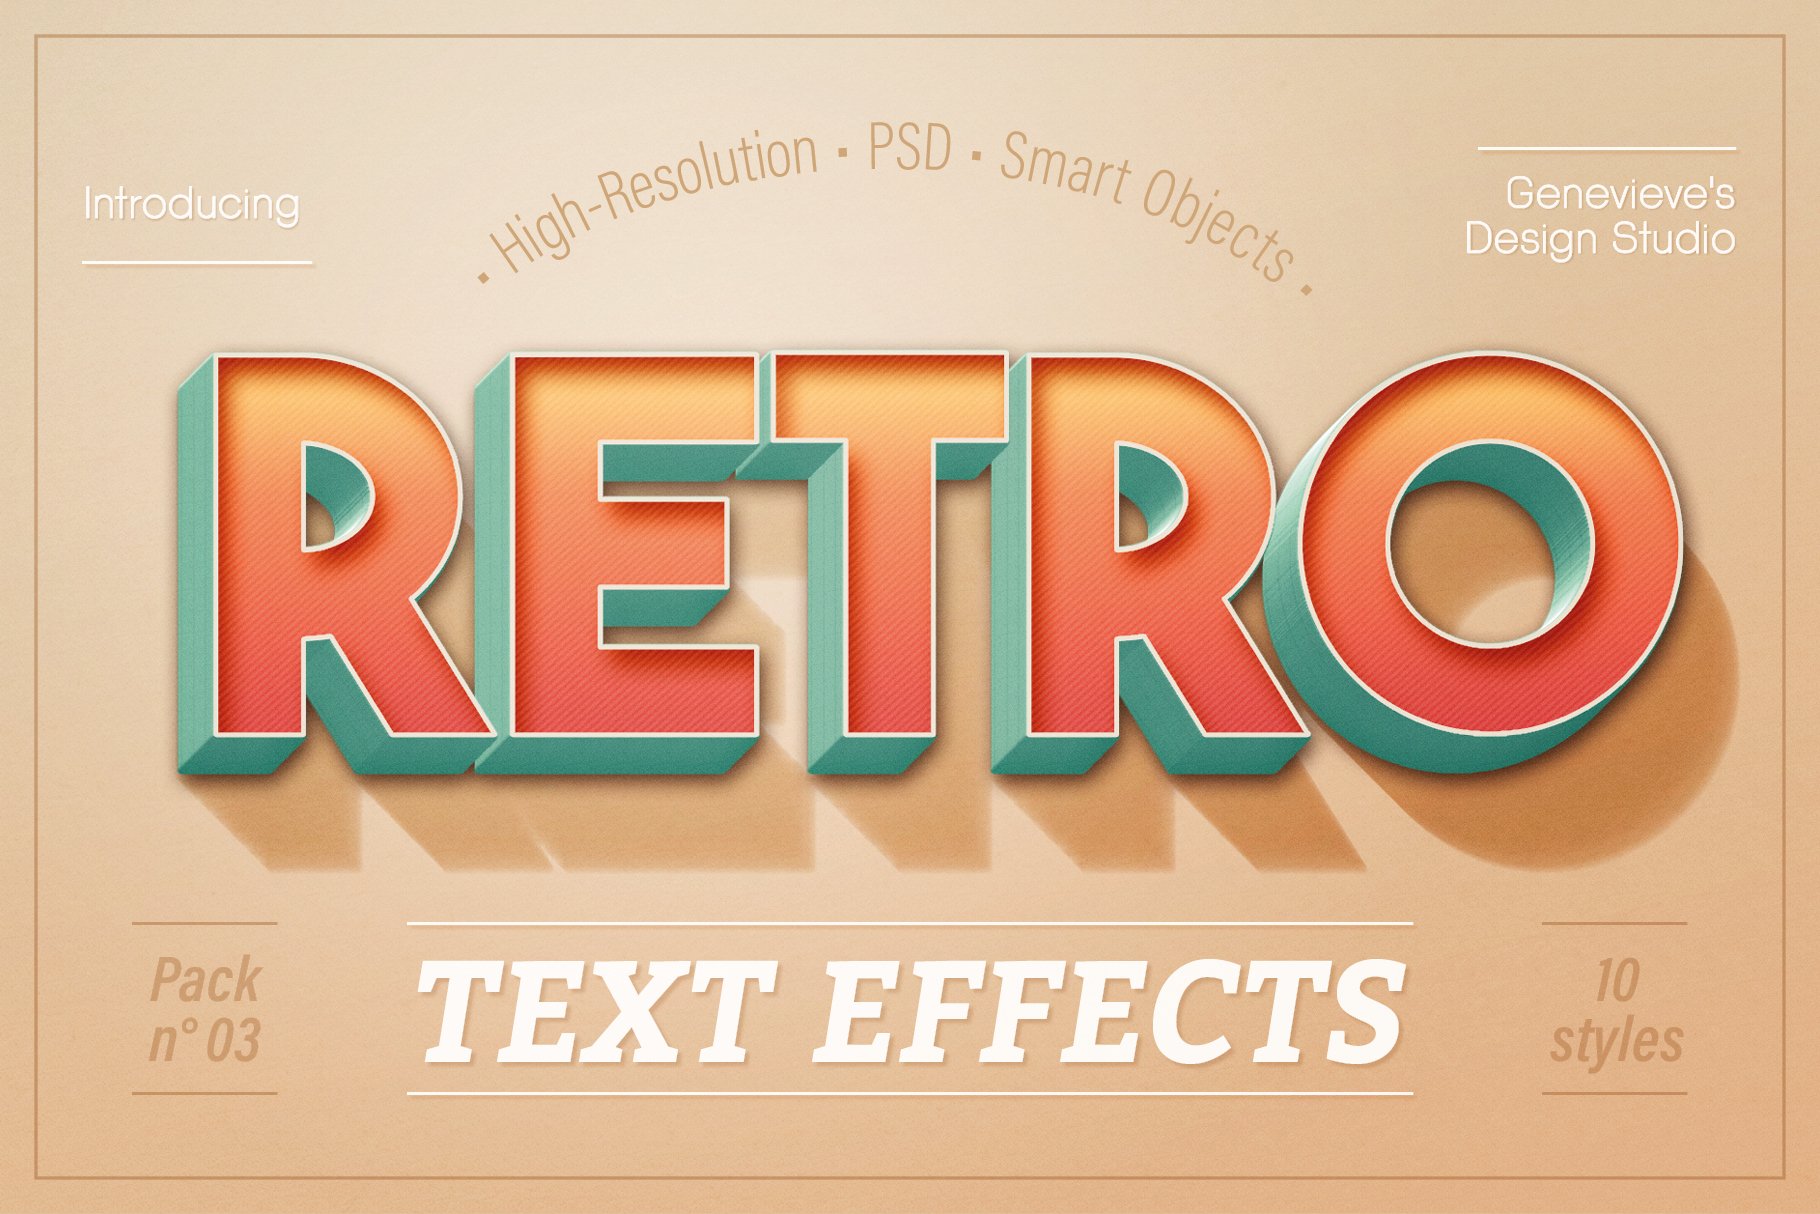 RETRO Text-Effects | Pack 03cover image.